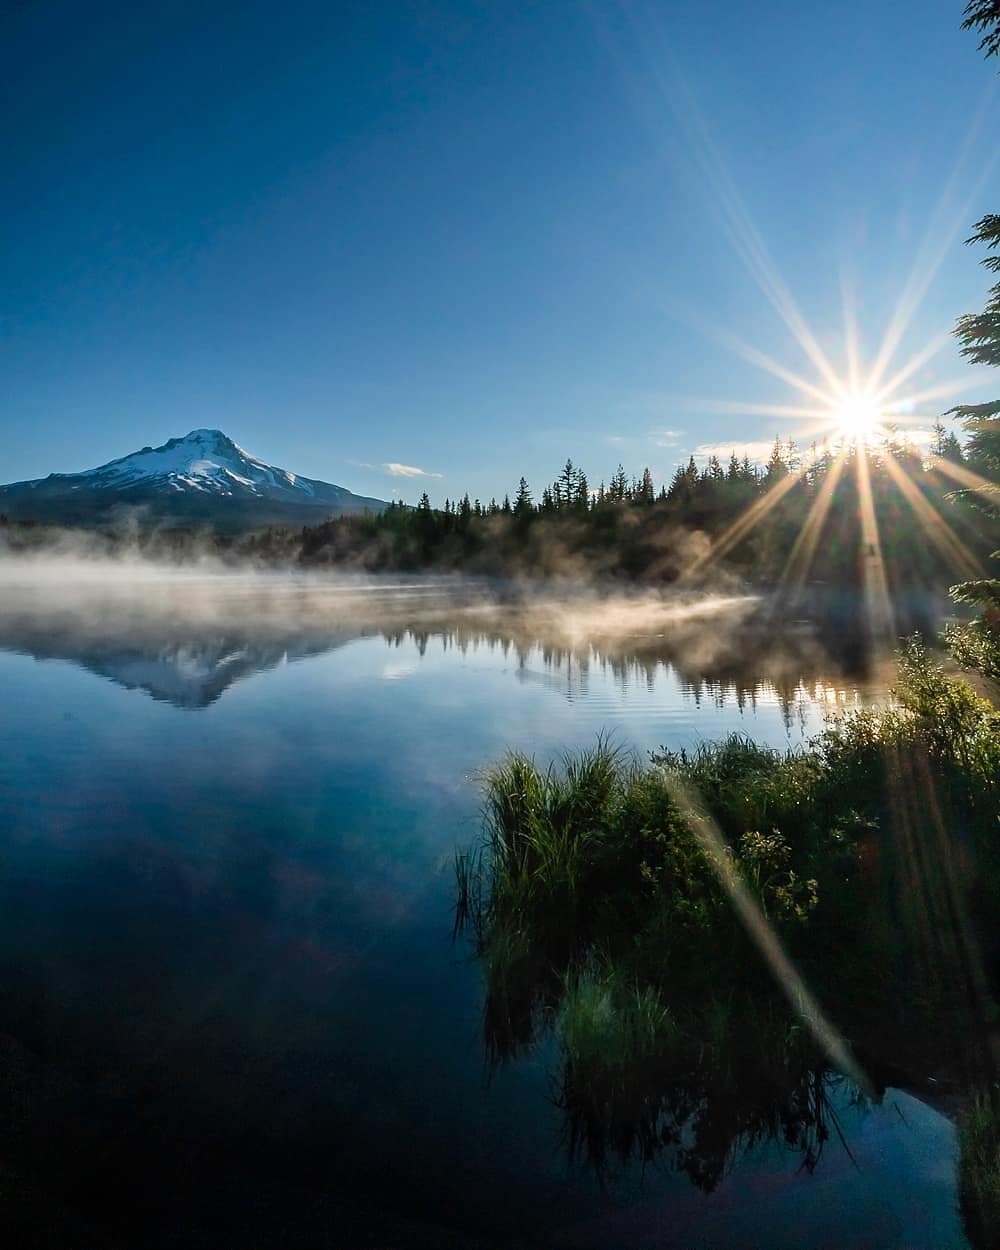 Sun shining over crystal clear lake with mountains in the back at Mt Hood National Forest, OR. Photo by Instagram user @browneyedsmile808